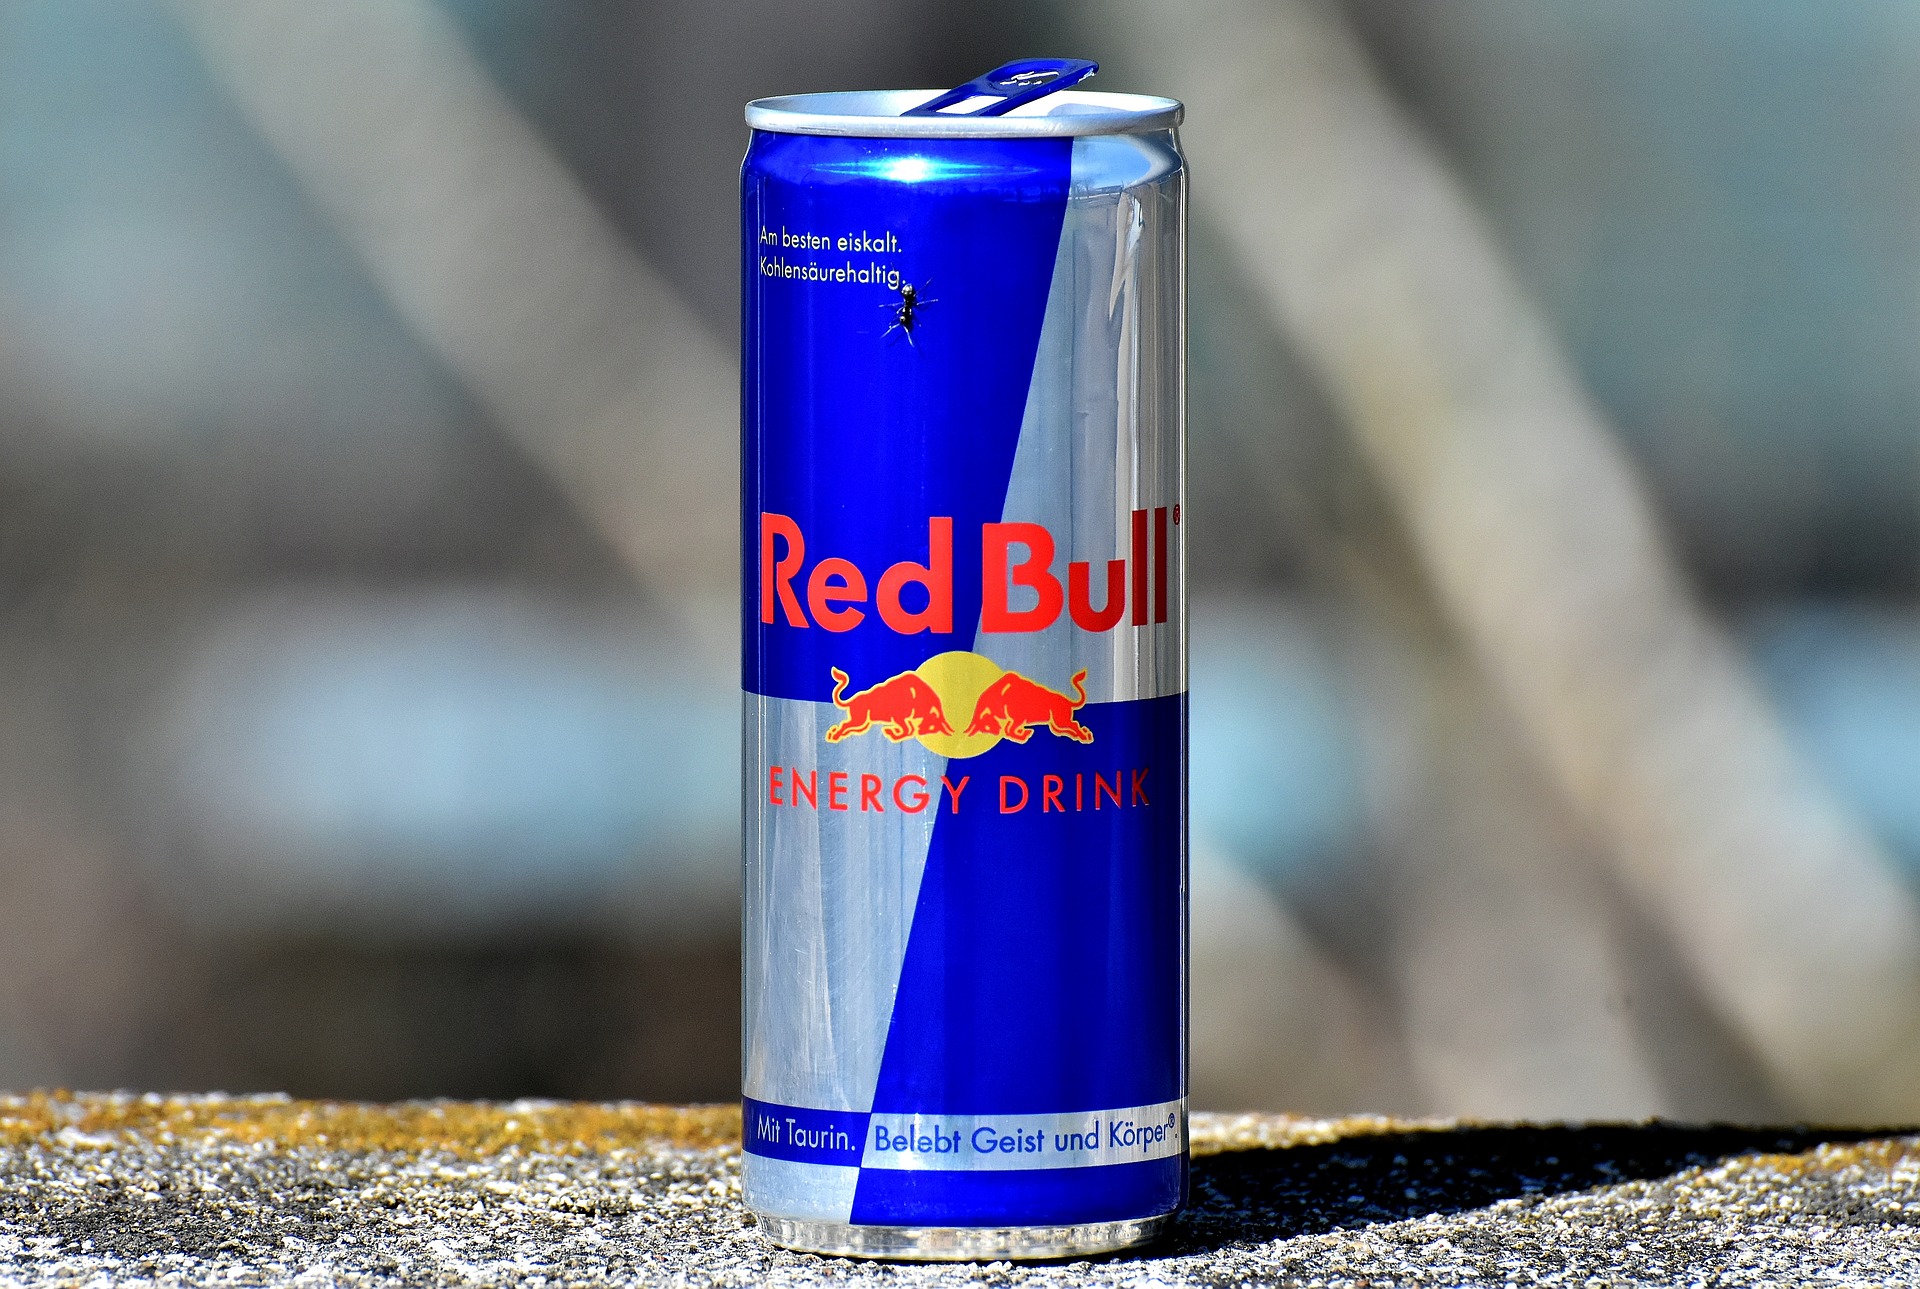 Are Energy Drinks Healthy?